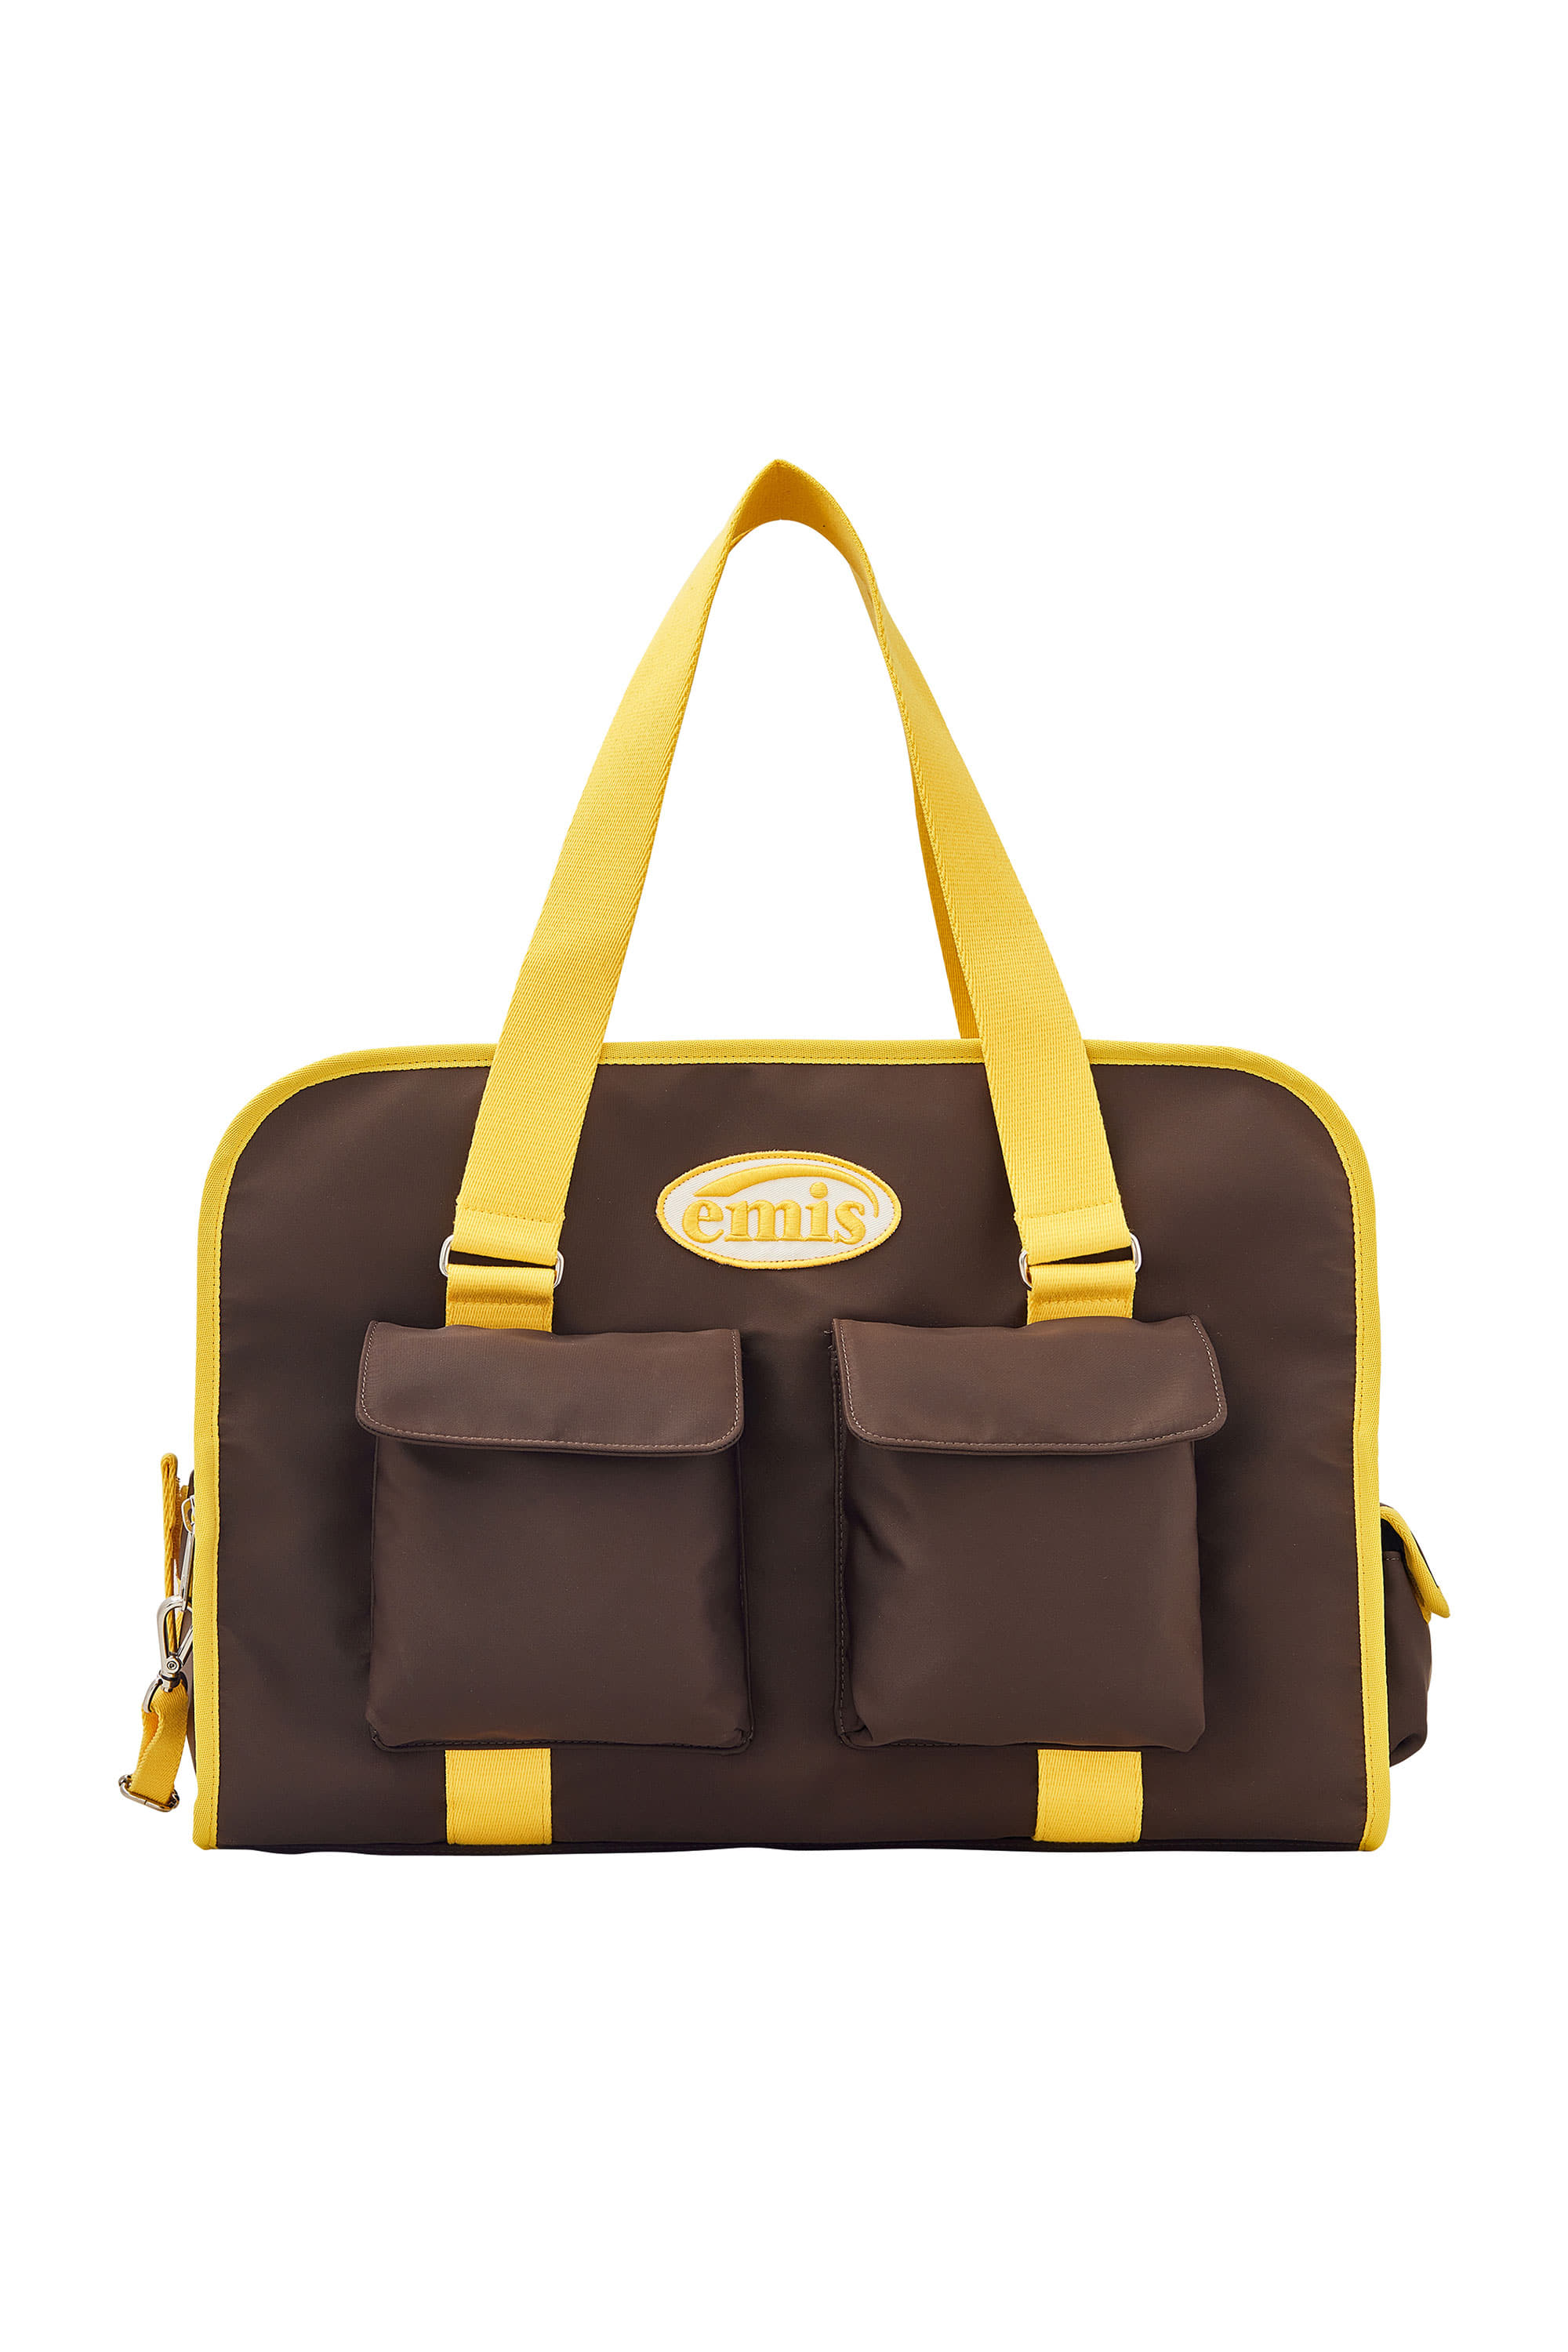 [PET] ALL-IN-ONE CARRY BAG-BROWN